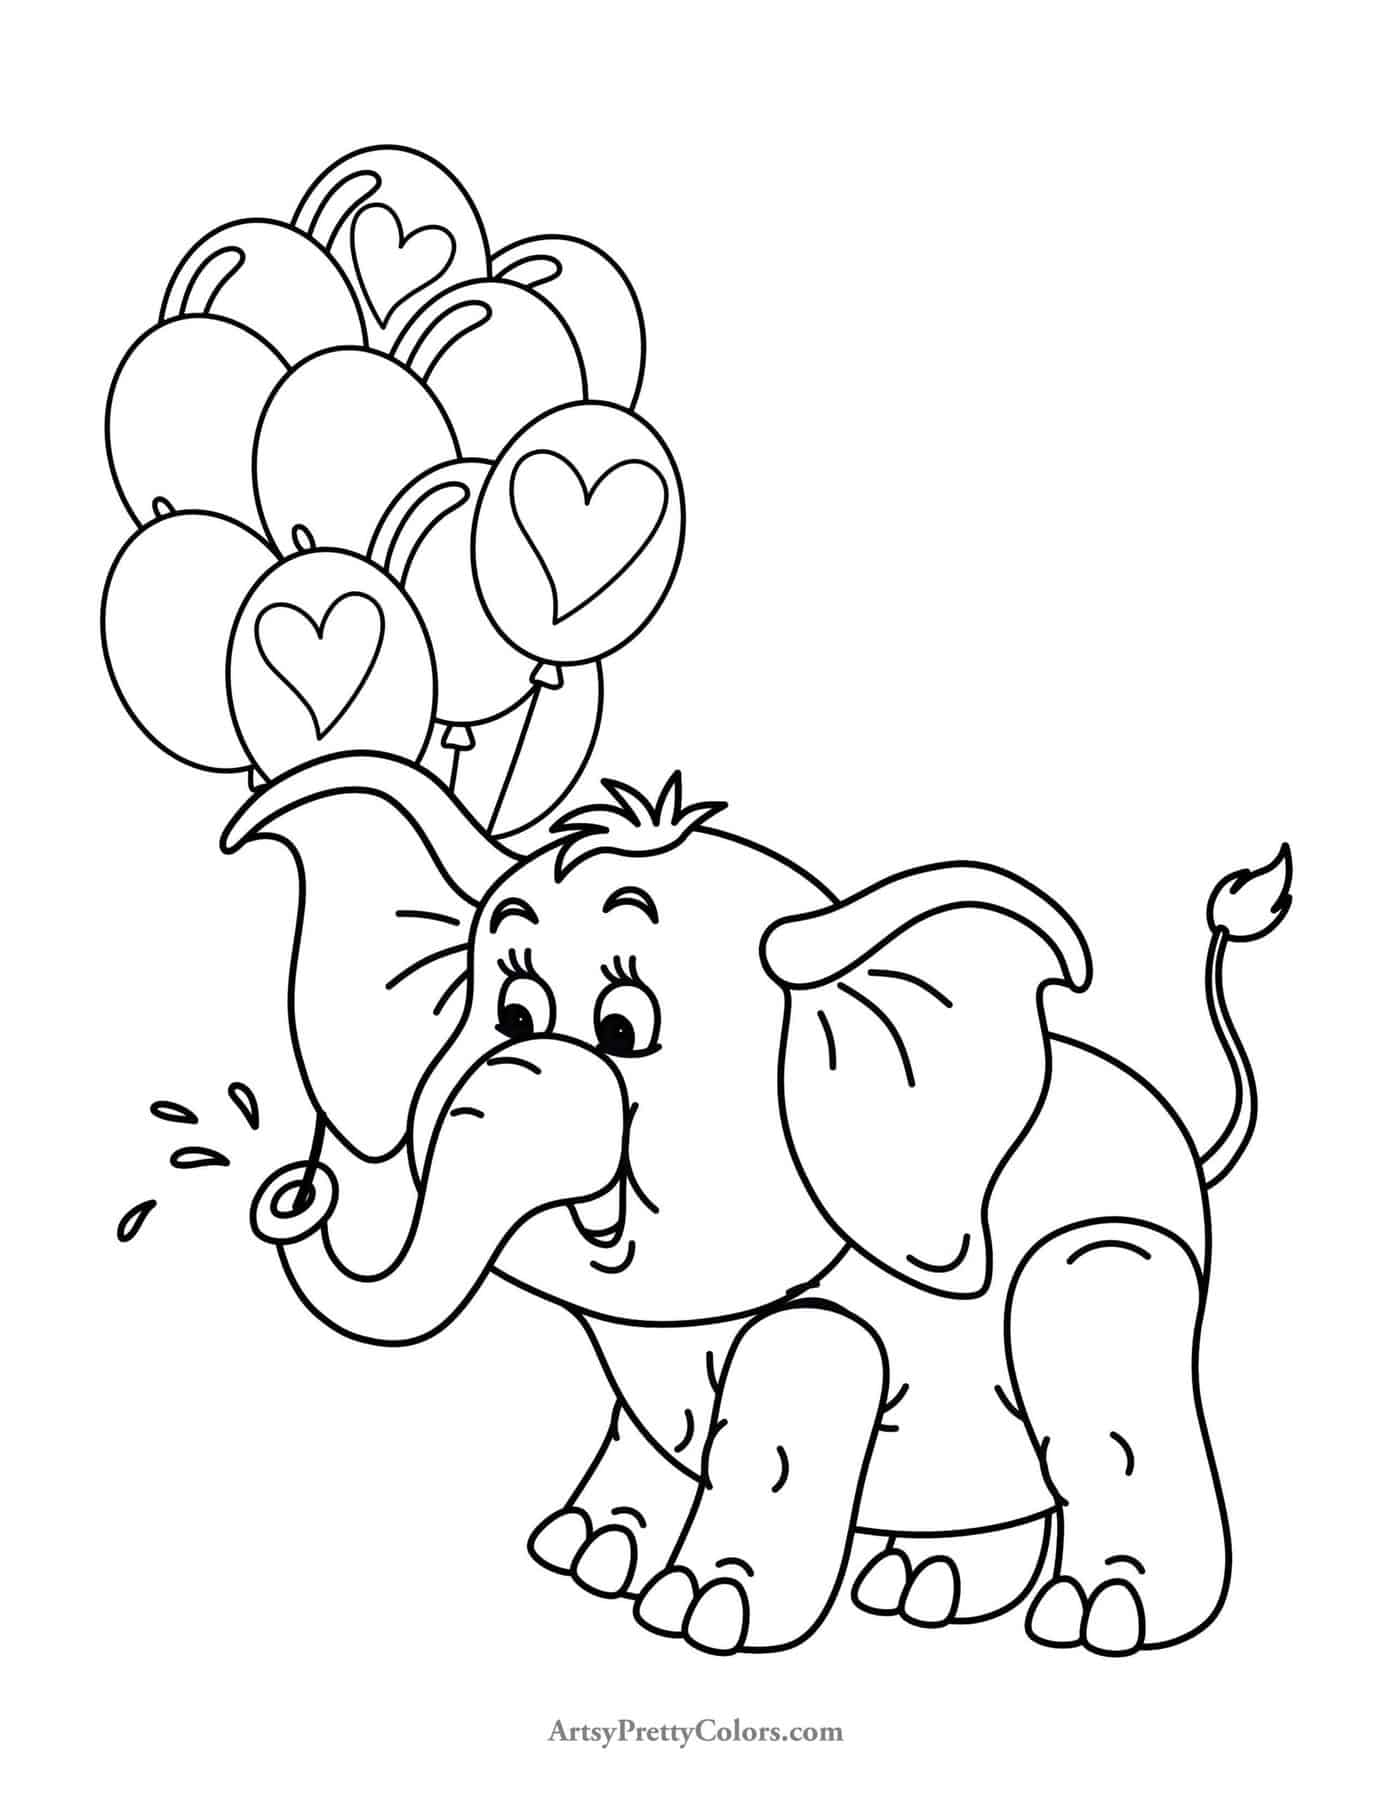 21 Valentine's Day Coloring Pages for Free   Artsy Pretty Plants